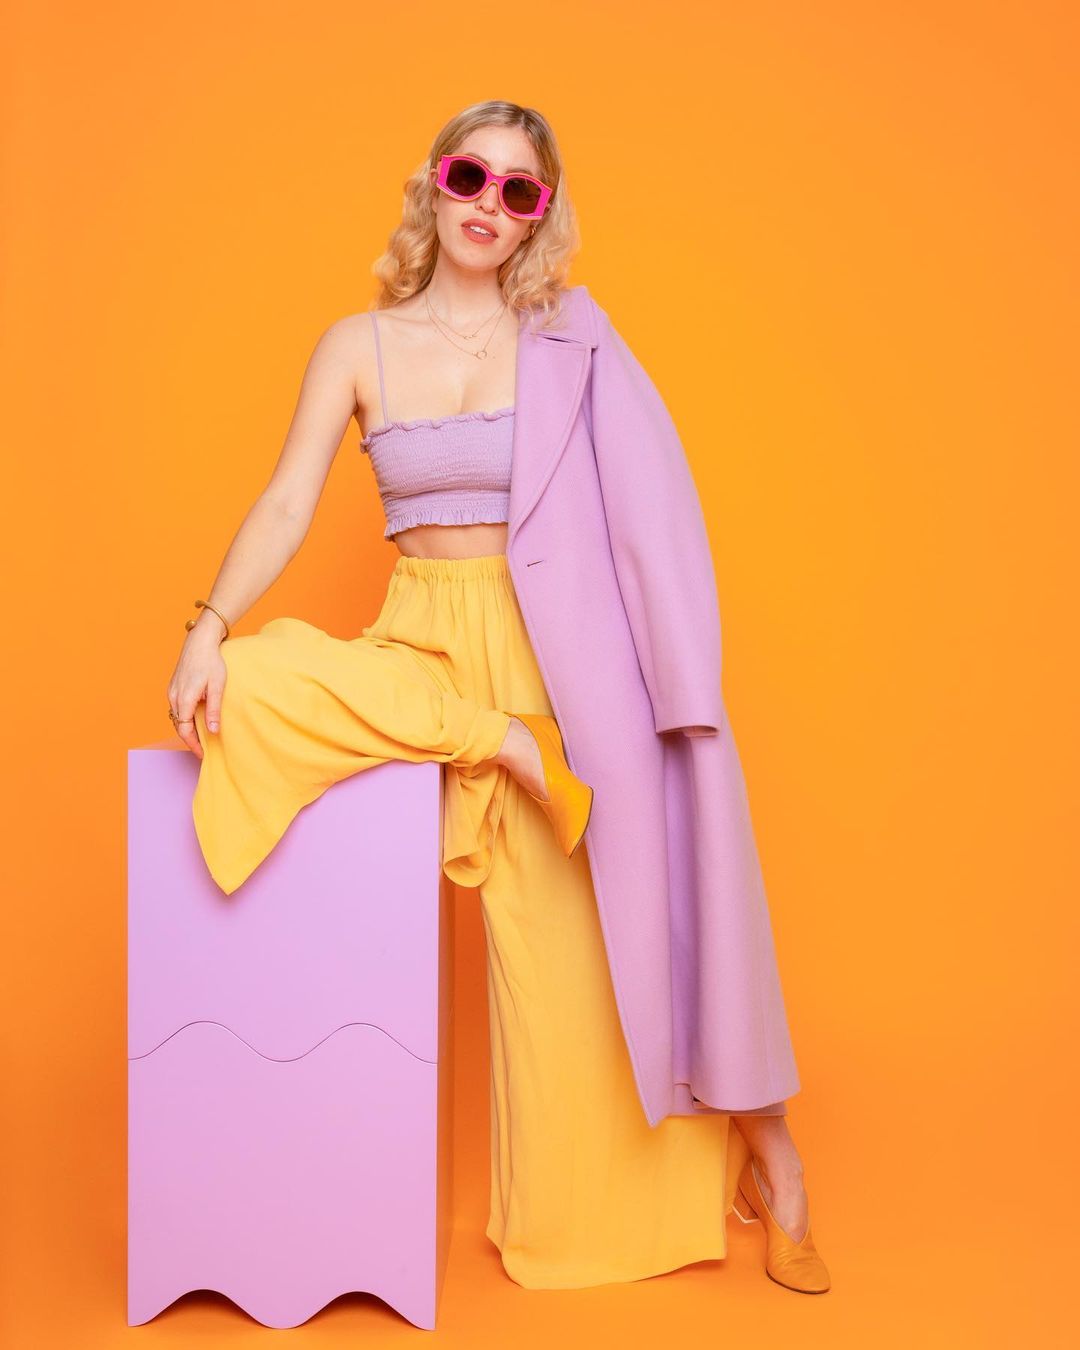 A woman standing with one leg leaning on the double sided wavy cube bundle from Moodelier with an orange background